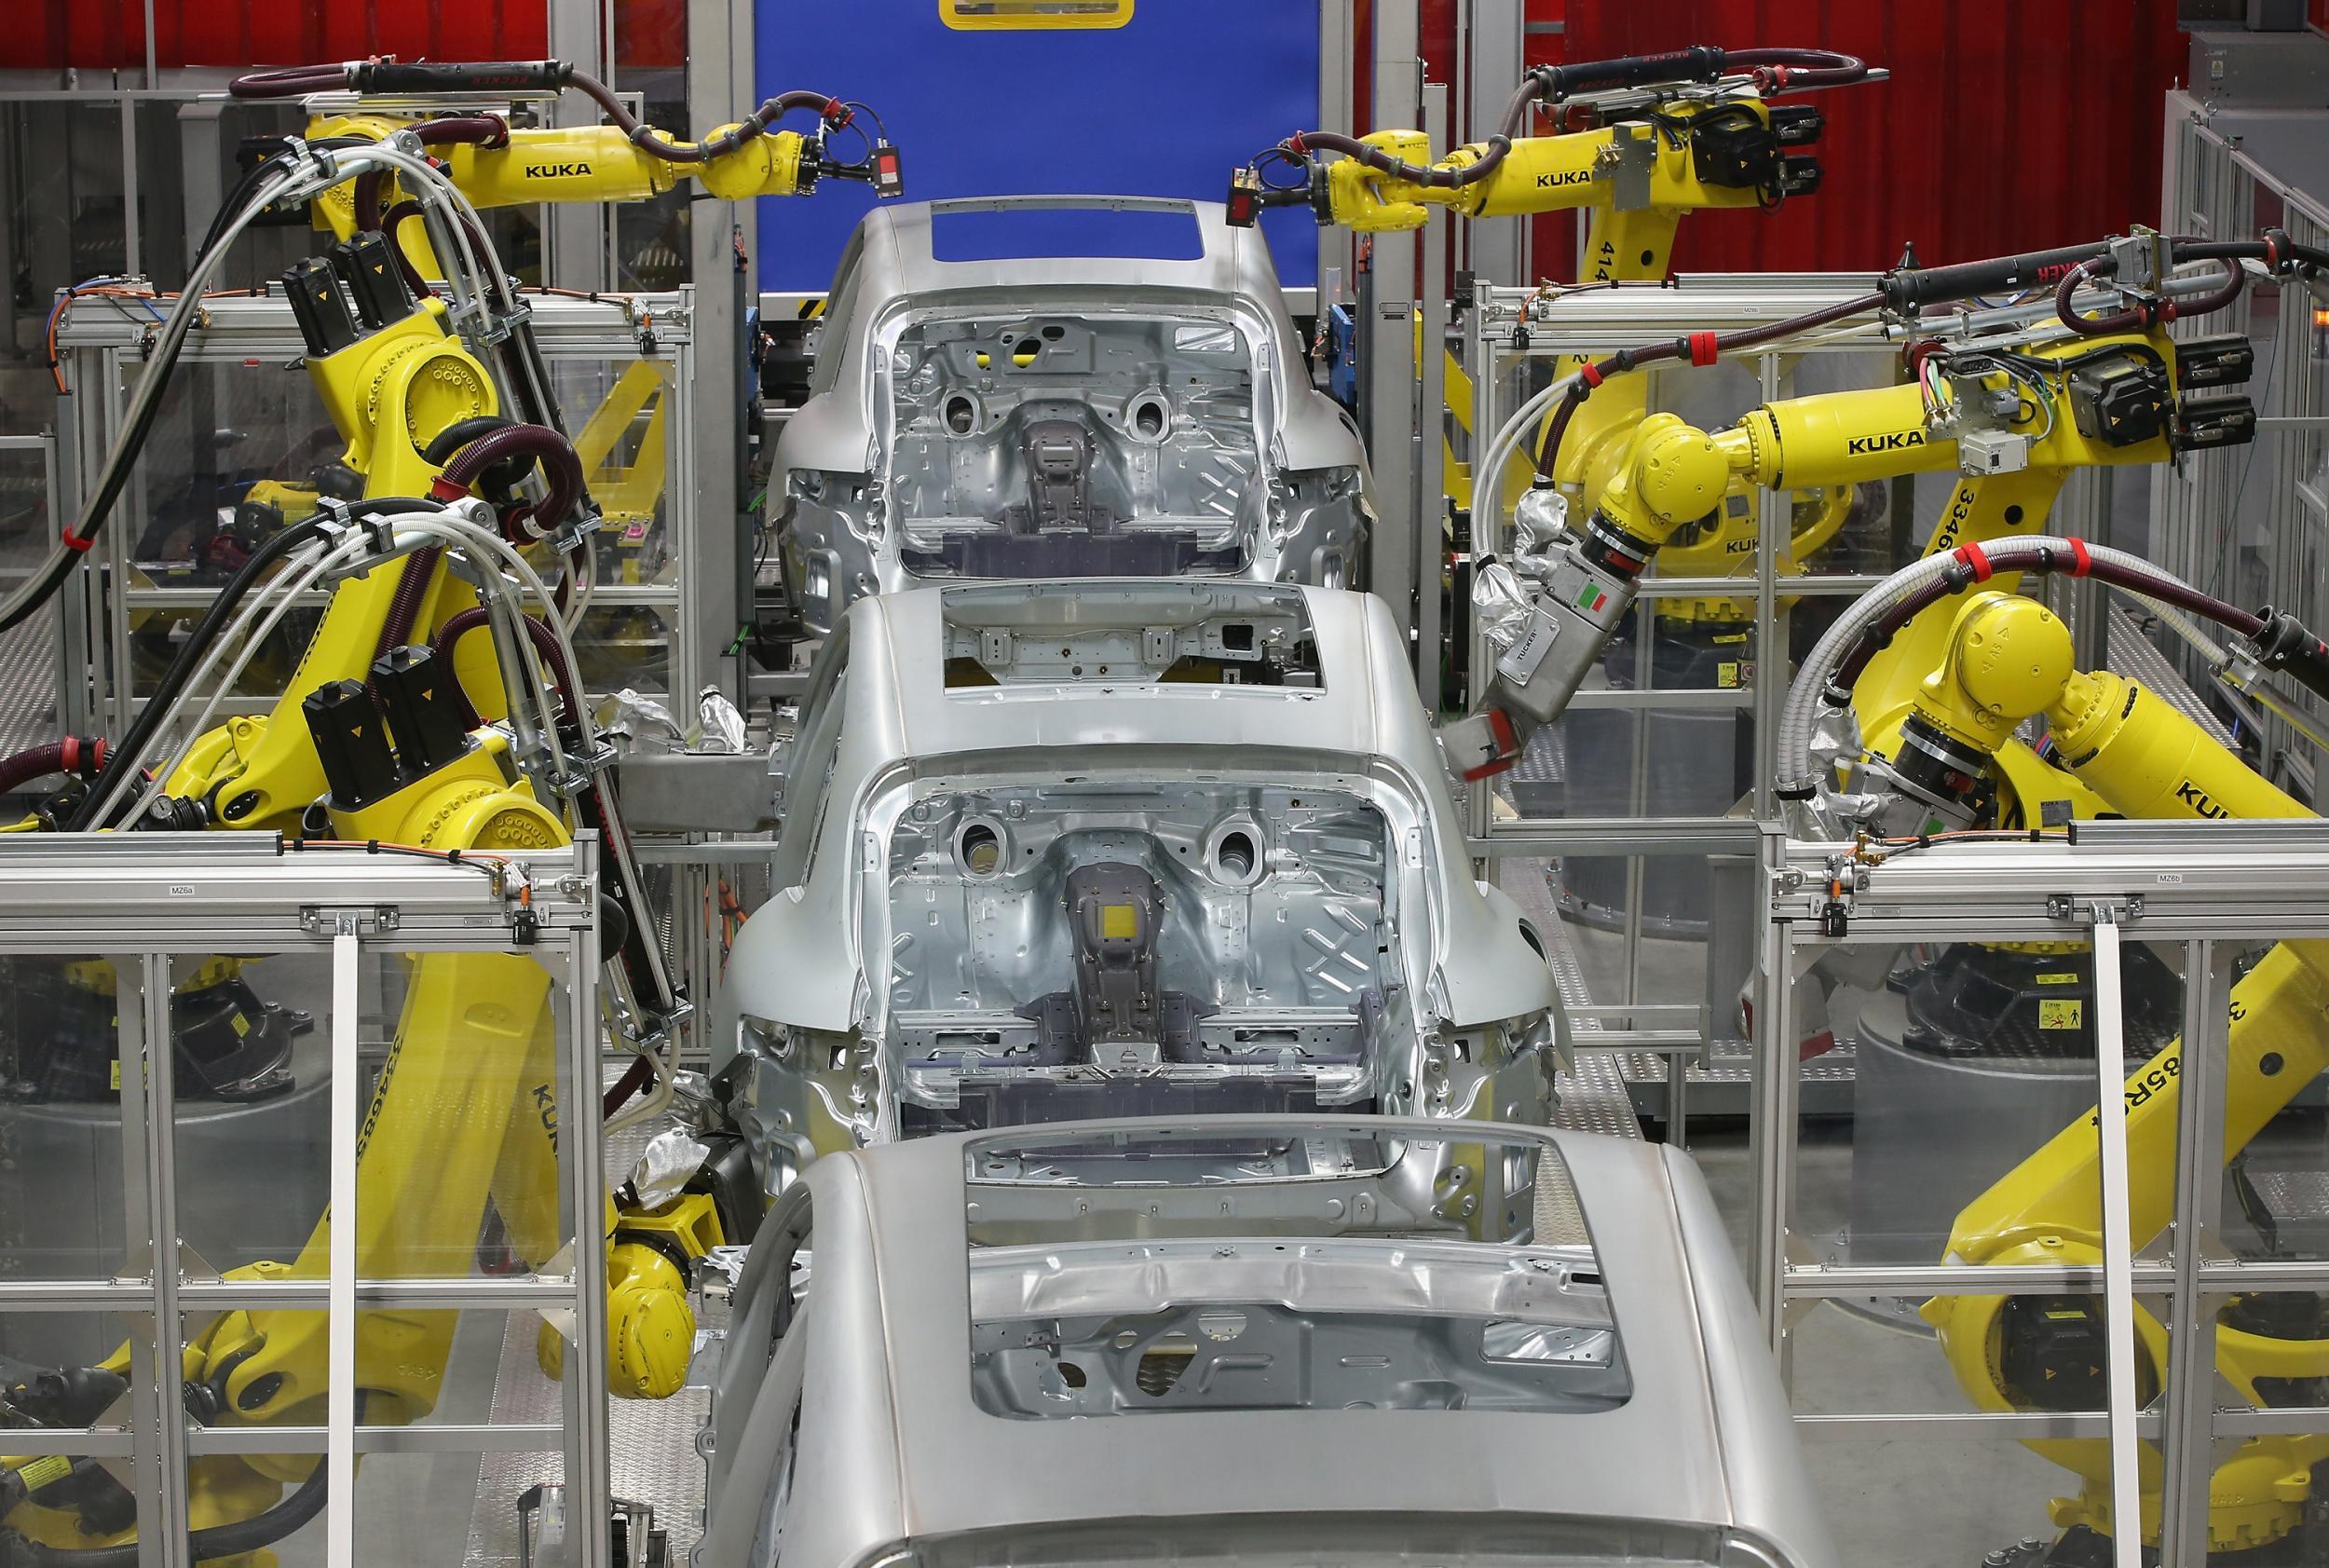 Industrial robots have already displaced human workers in some factories